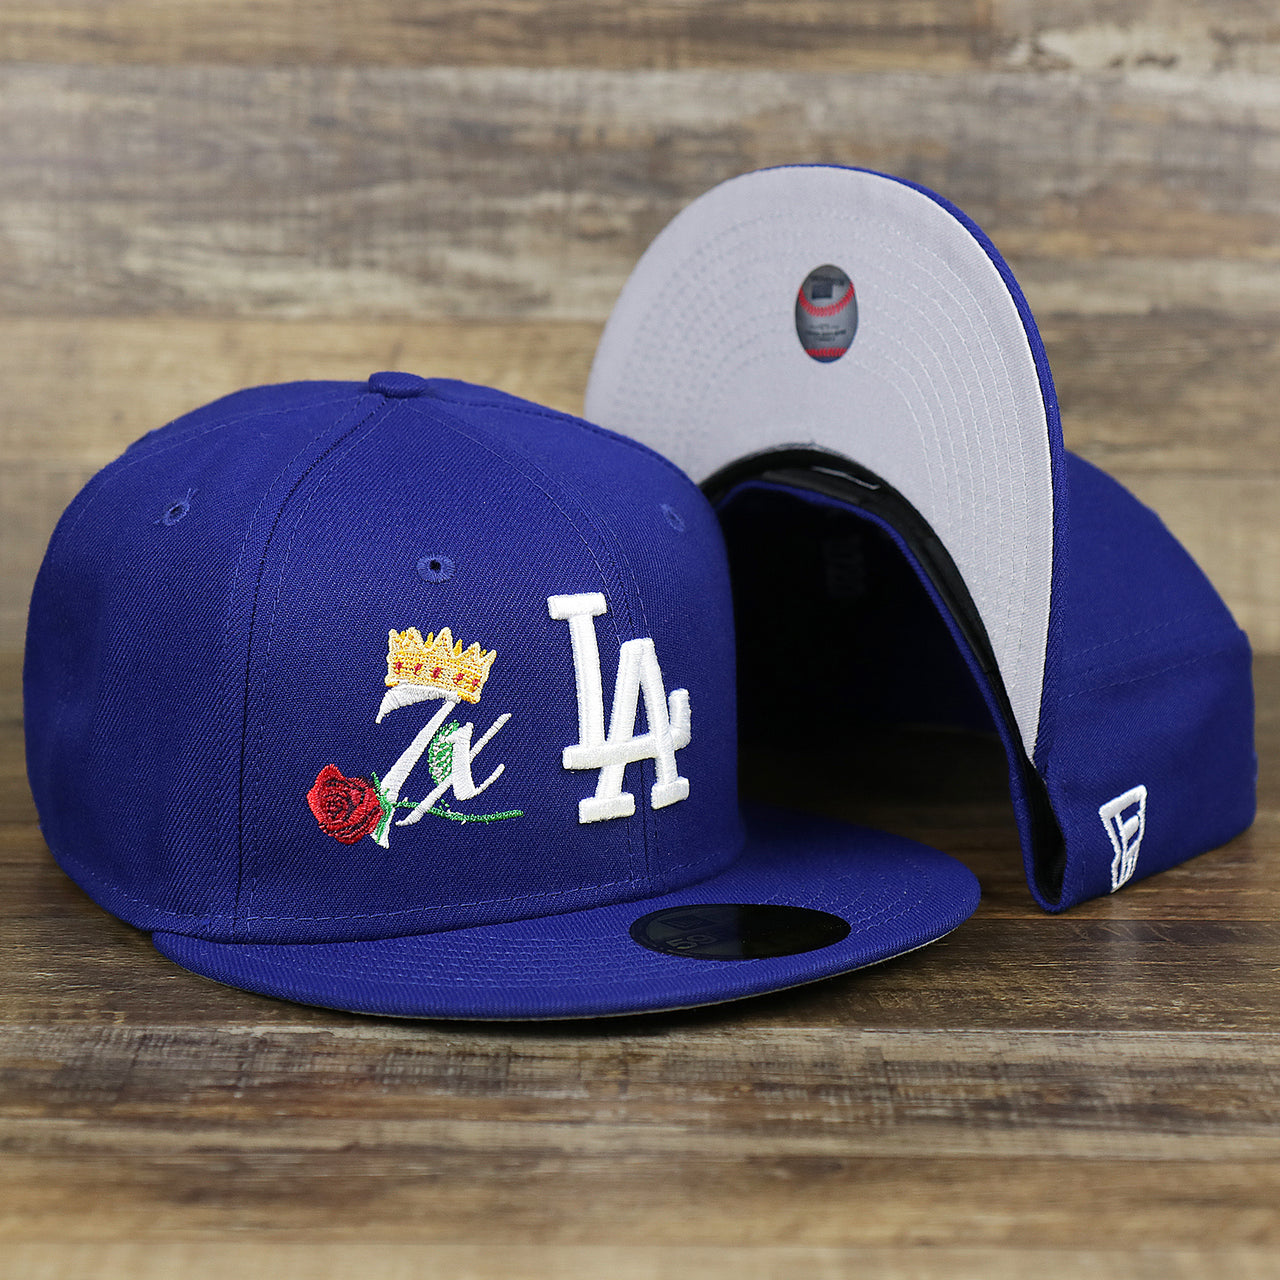 The Los Angeles Dodgers Crown Champions Gray Bottom World Championship Wins Embroidered Fitted Cap | Royal Blue 59Fifty Cap